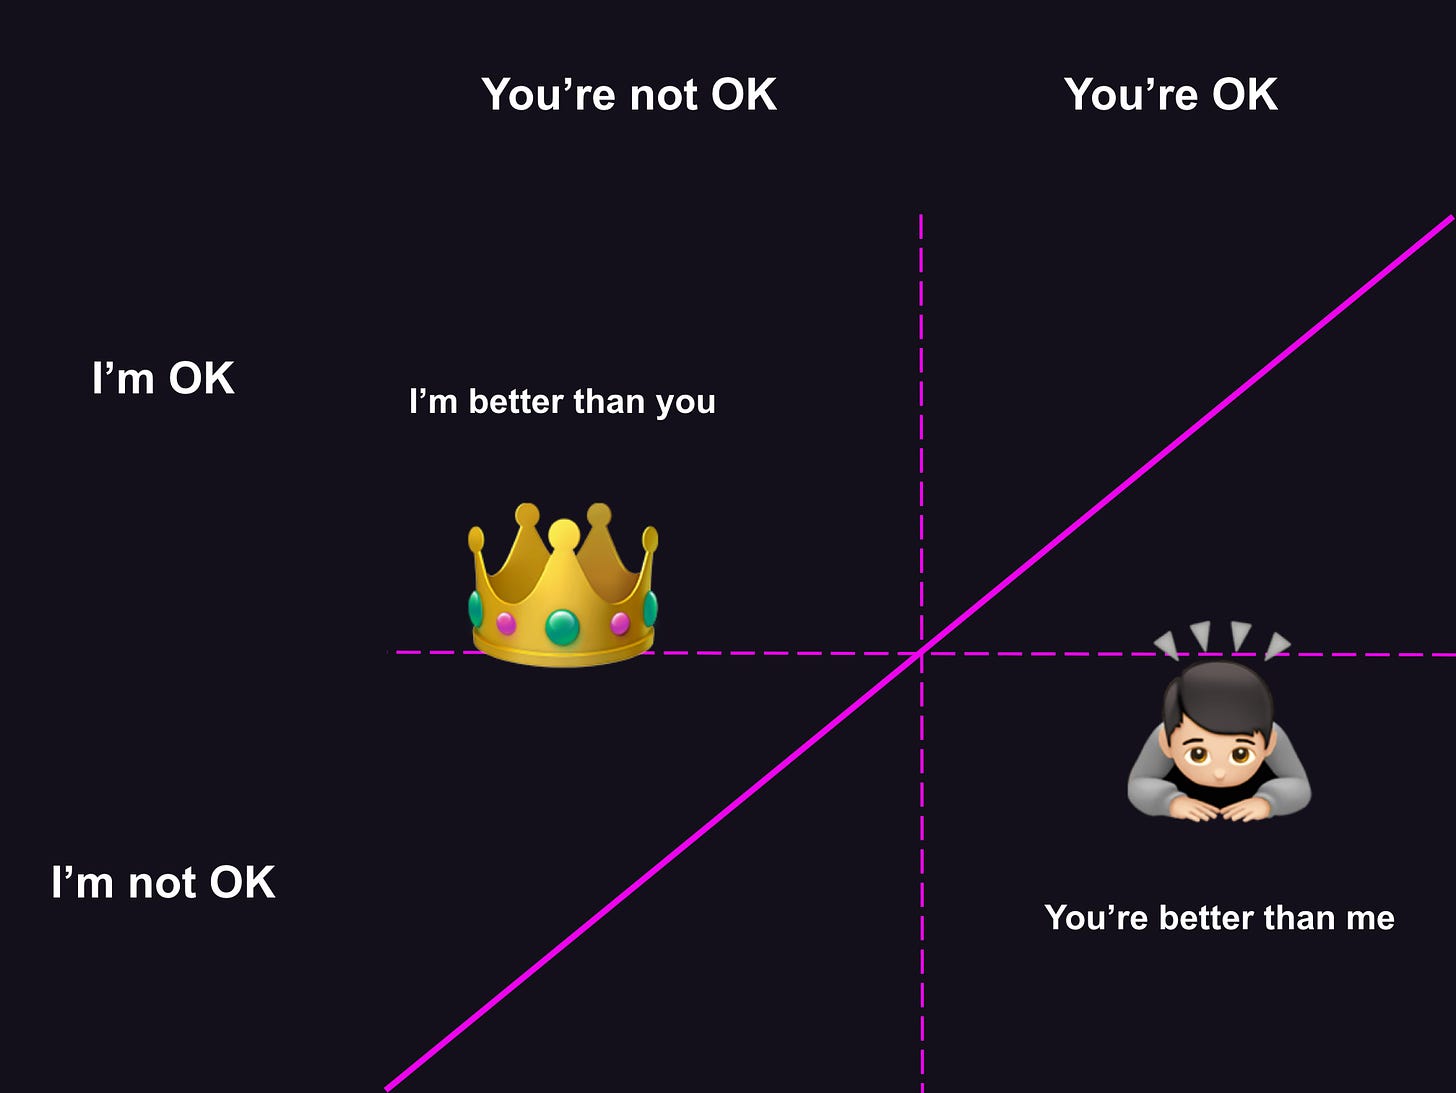 Same diagram, with a 45 degree line splitting the original axes. Above the line is "I'm better than you", when I'm OK > You're OK. Below is "You're better than me", when I'm OK < You're OK. 